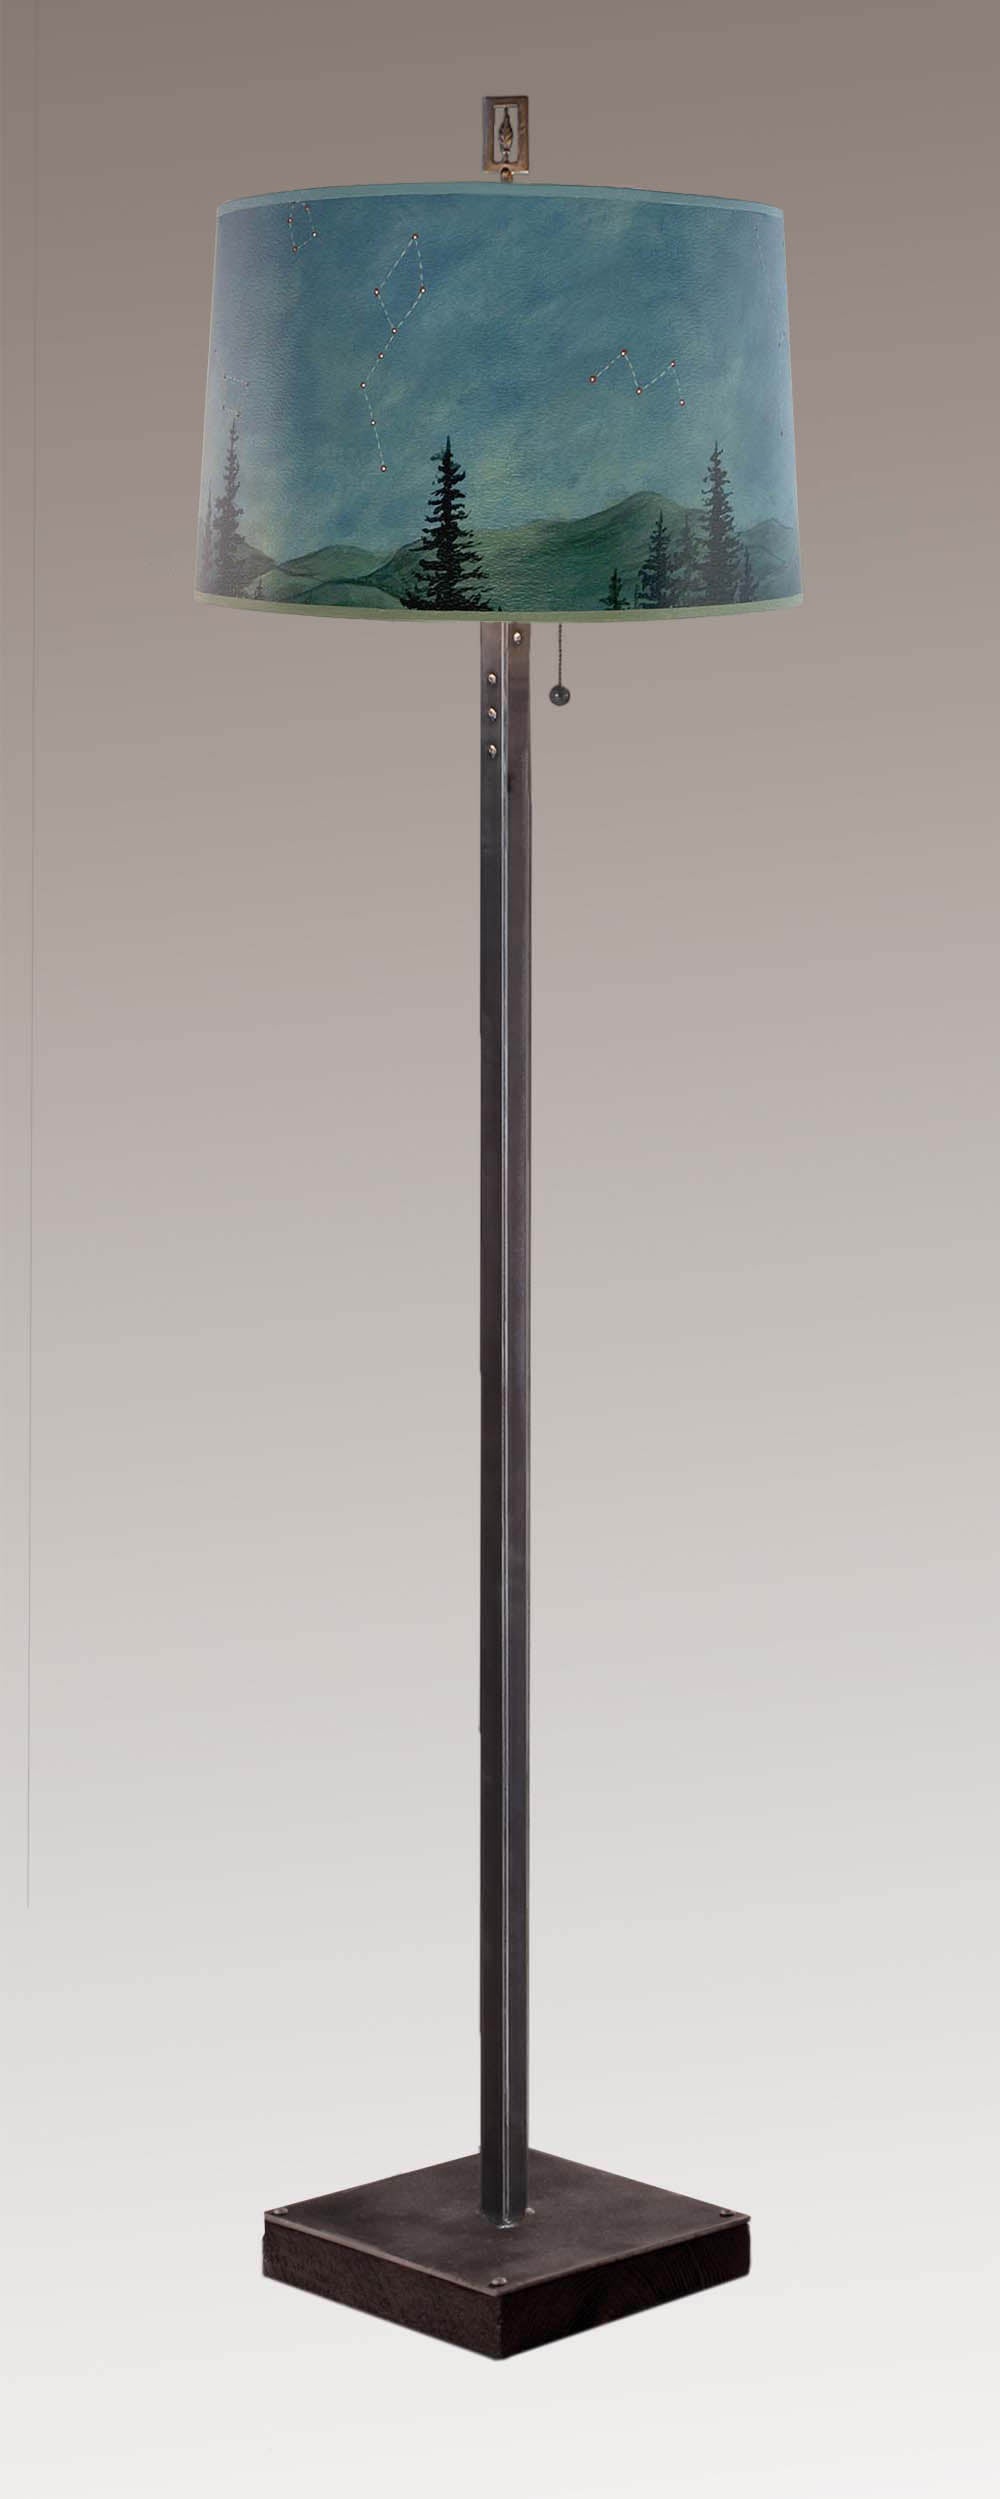 Janna Ugone & Co Floor Lamps Steel Floor Lamp on Reclaimed Wood with Large Drum Shade in Midnight Sky